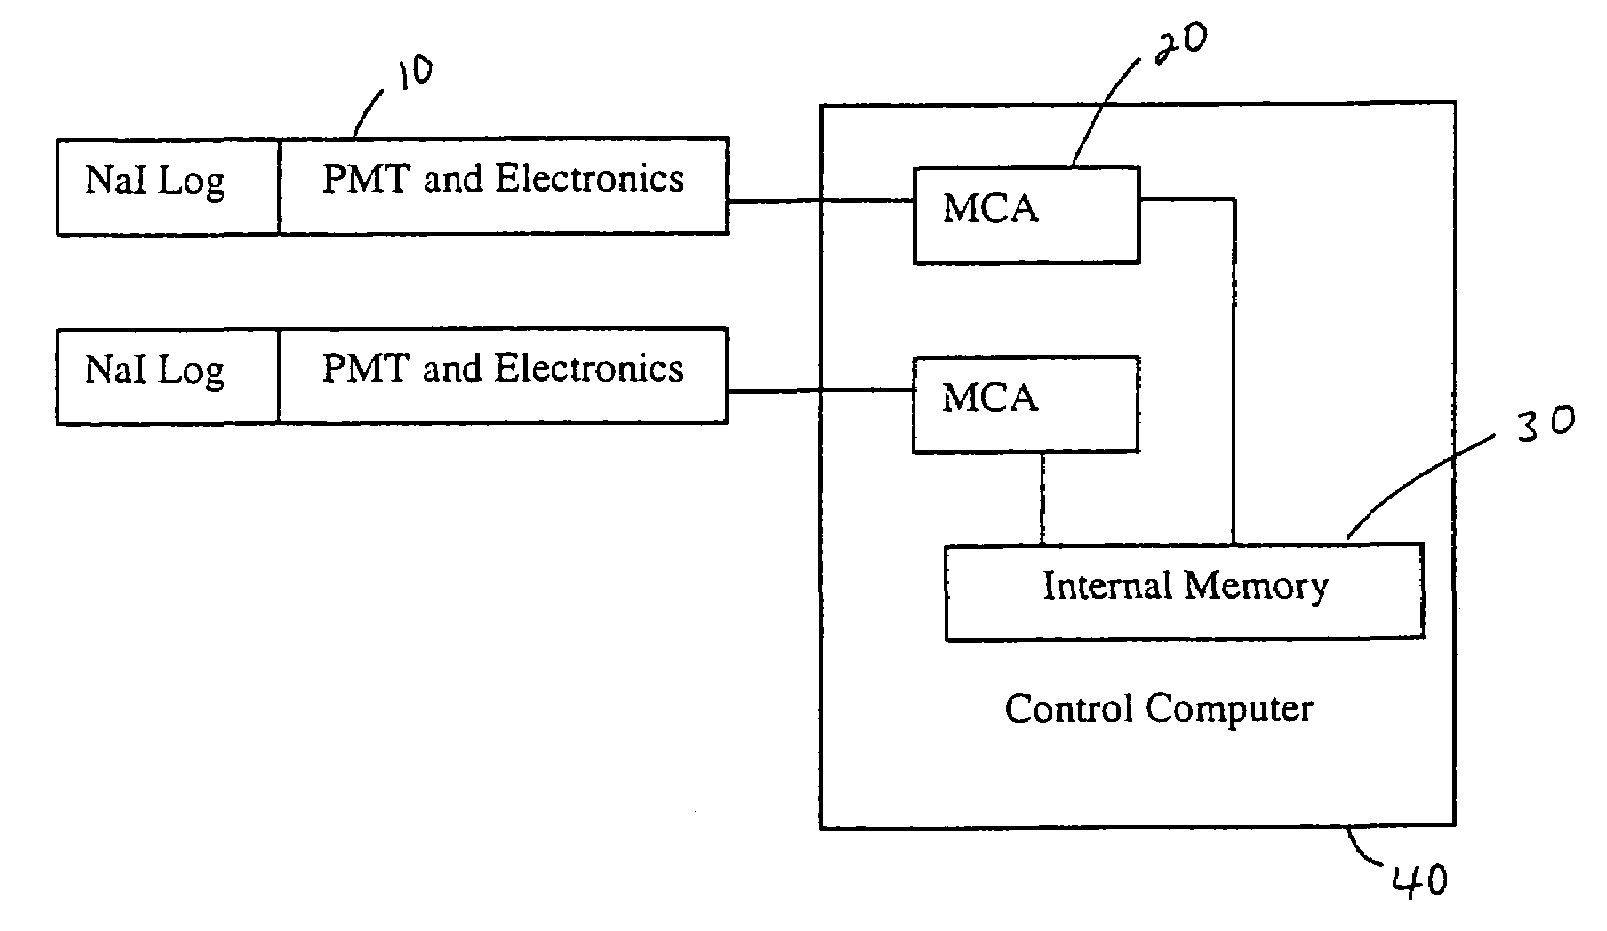 Data acquisition, control, and spectral analysis software for multi-channel analyzers